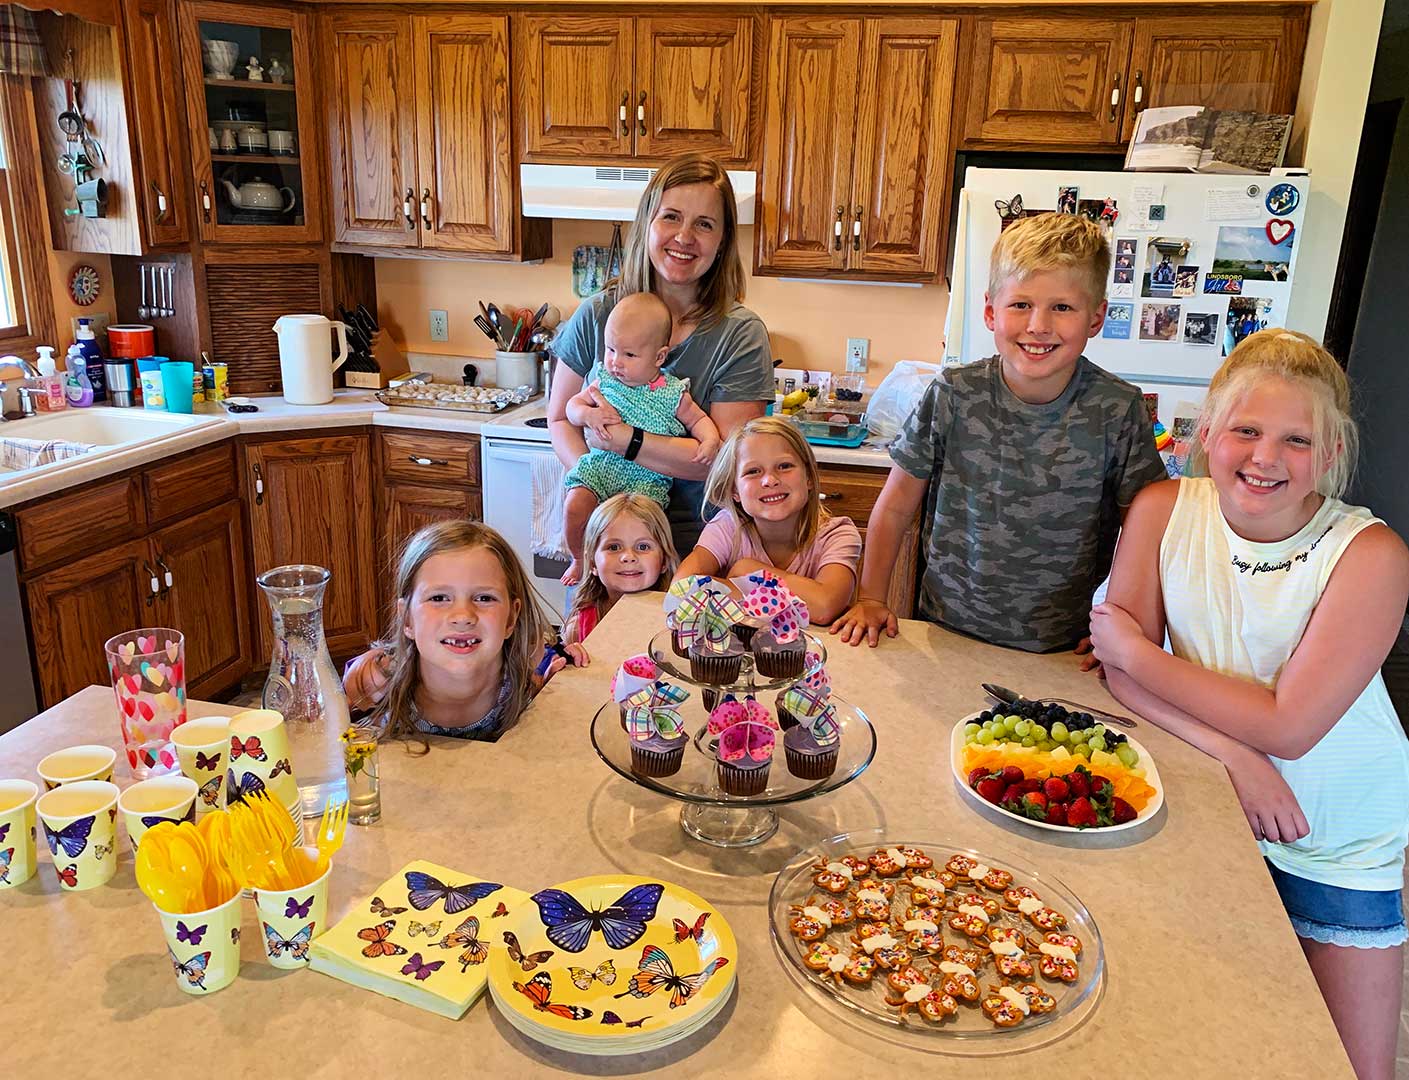 Children standing around snacks prepared for a Butterfly themed birthday party.